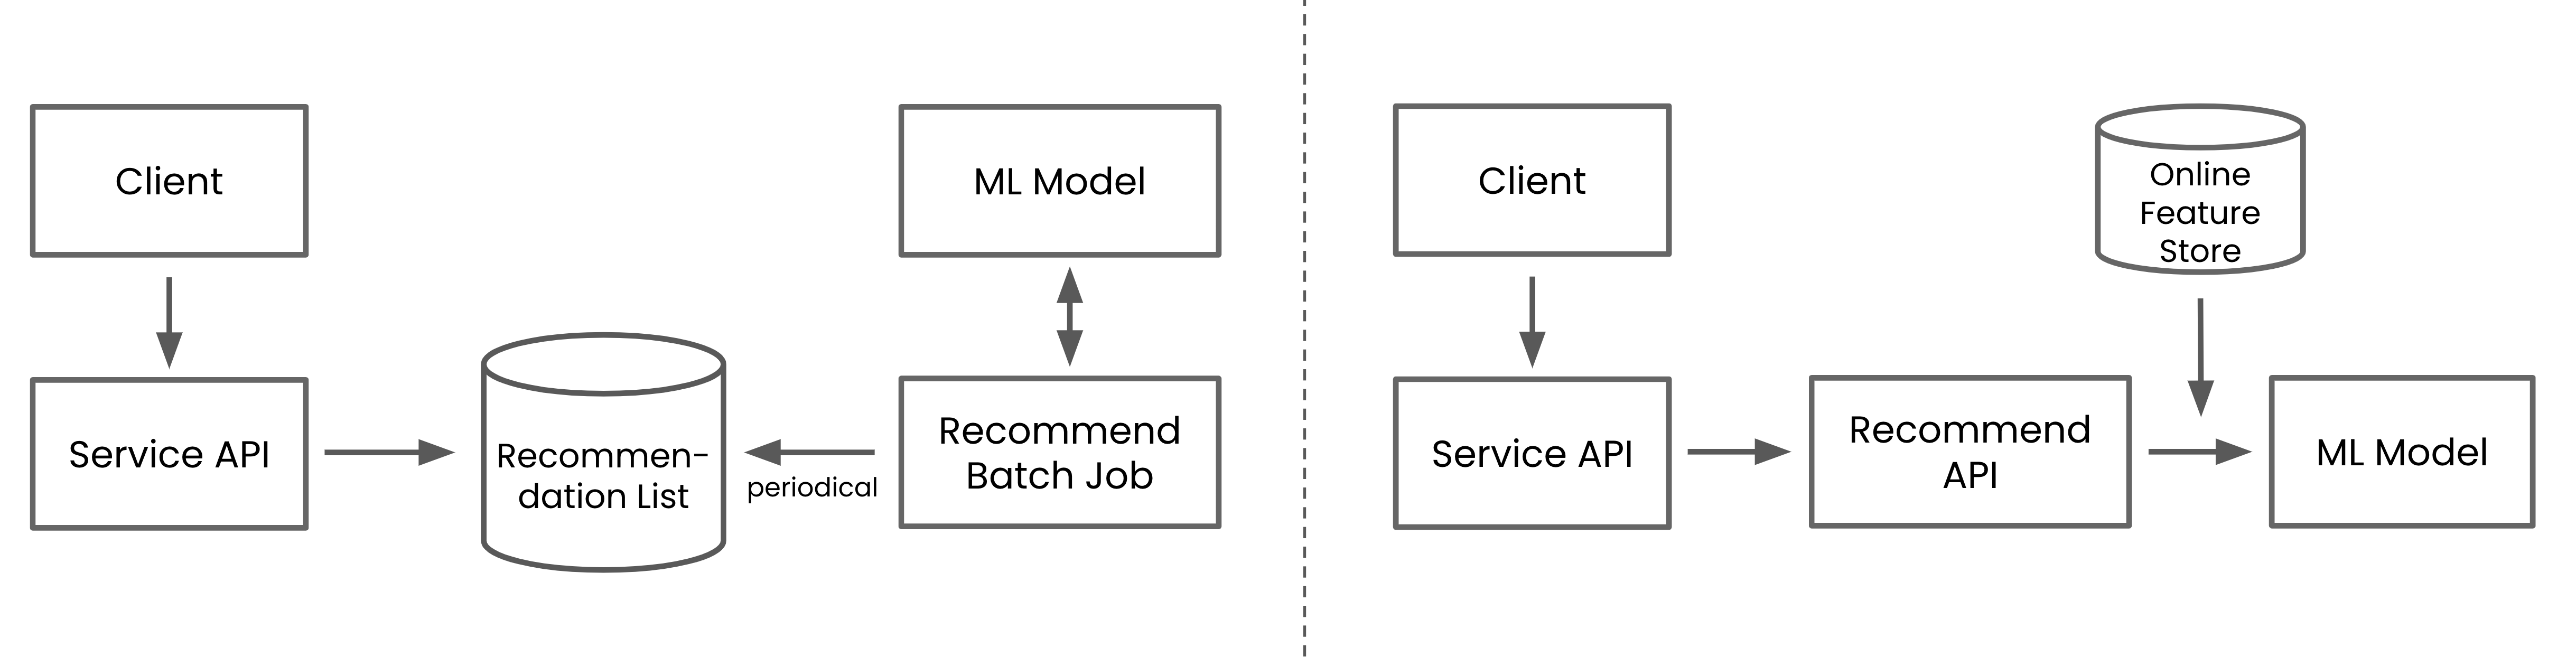 Real-time recommendations architecture at OLX.